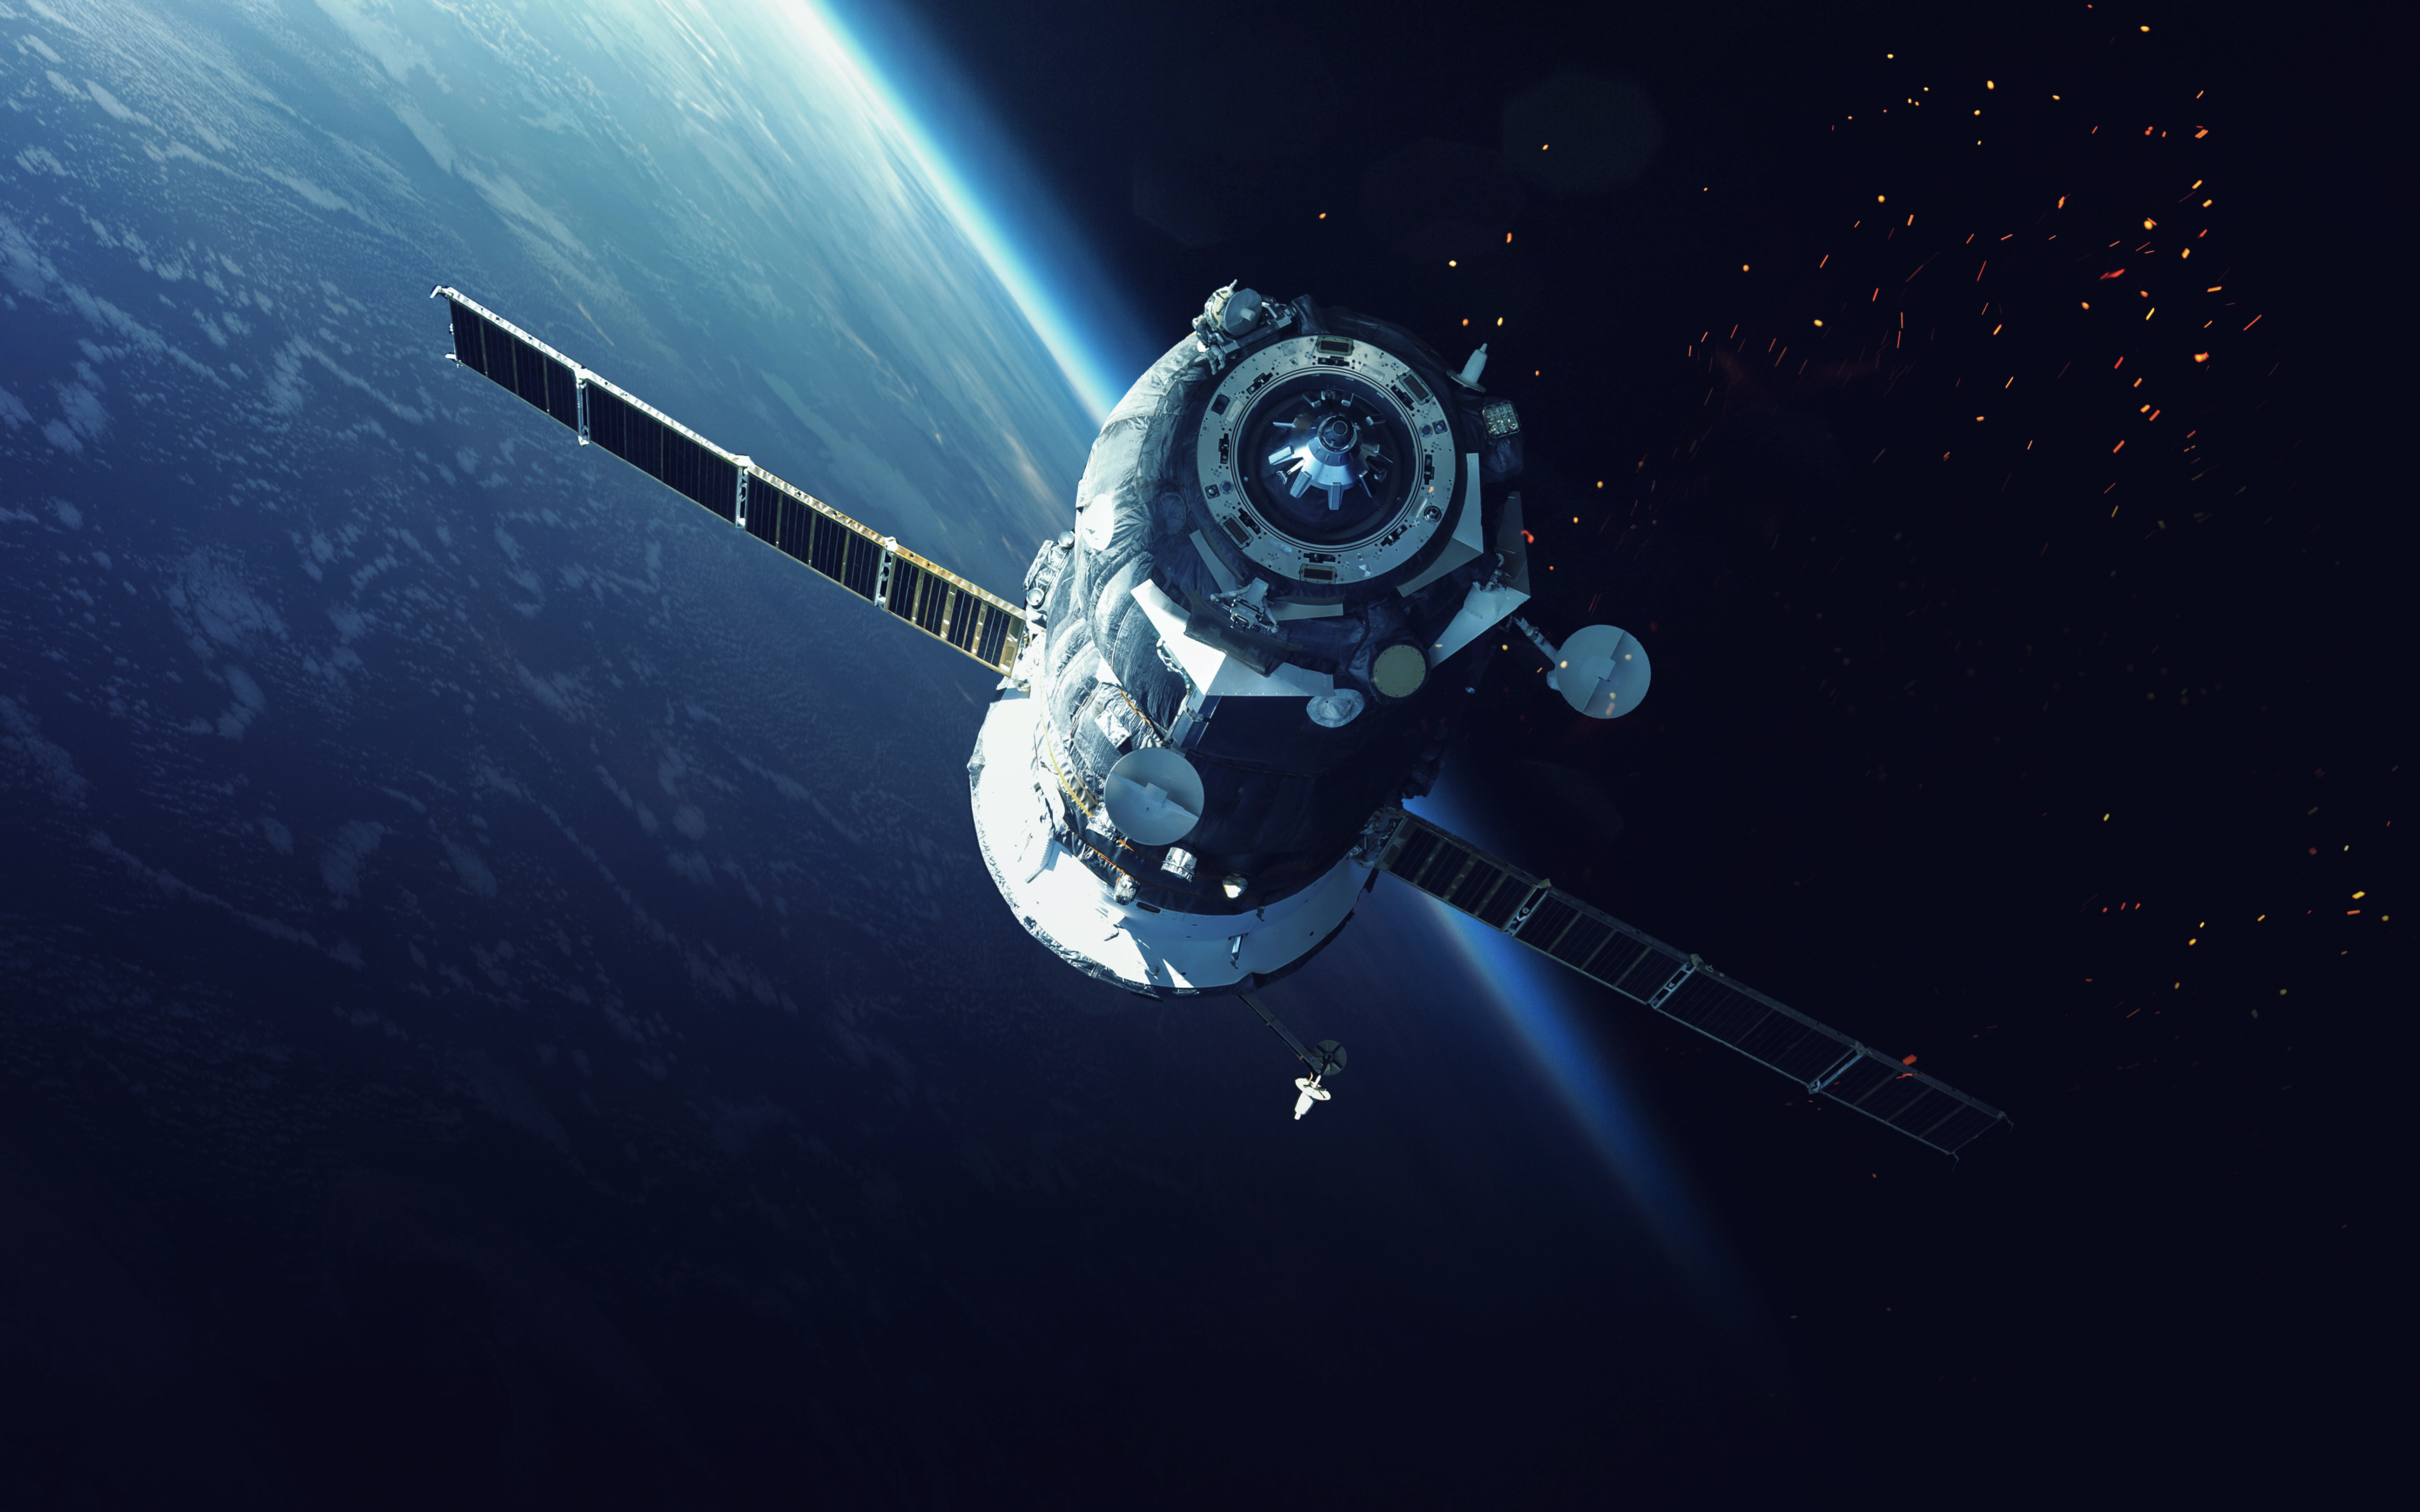 satellite wallpaper,space station,outer space,spacecraft,satellite,space